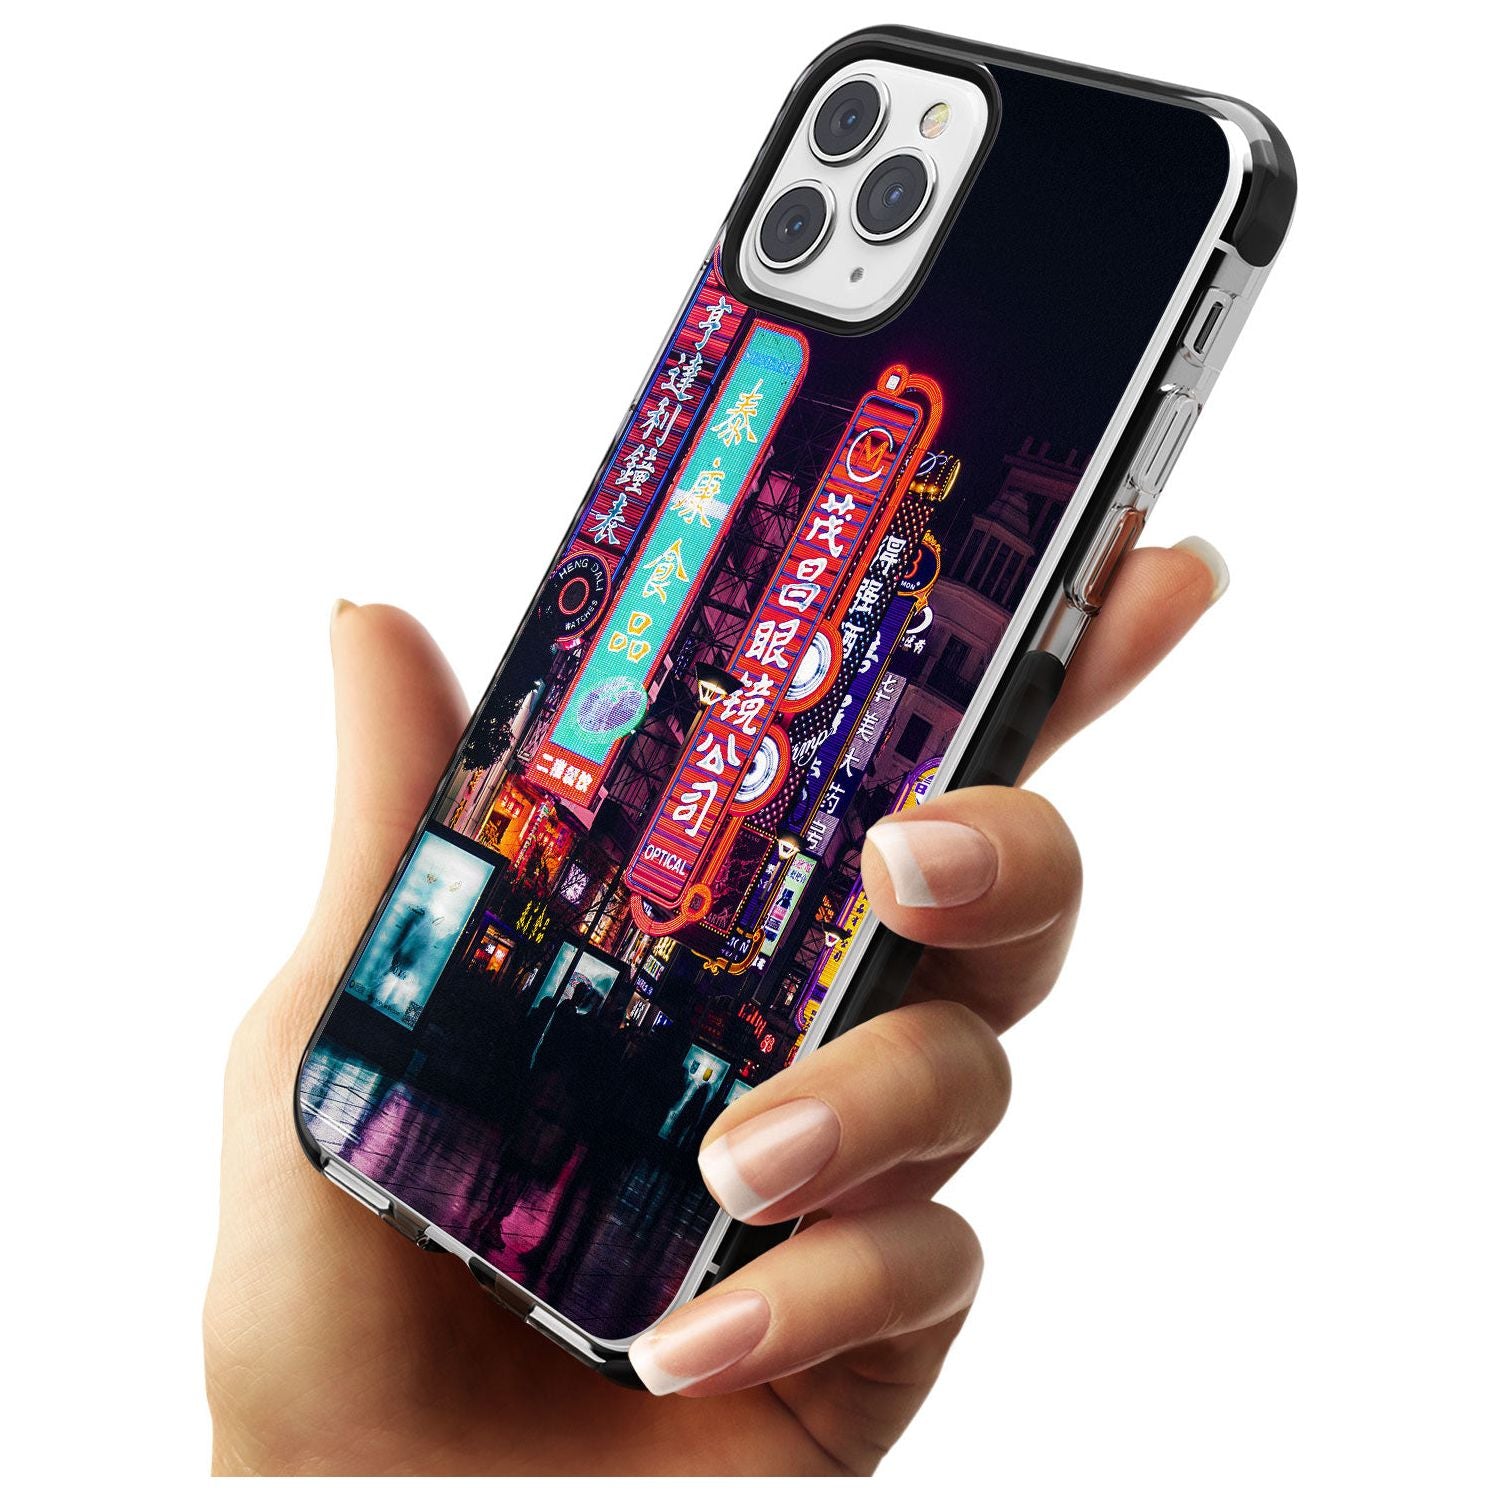 Busy Street - Neon Cities Photographs Black Impact Phone Case for iPhone 11 Pro Max